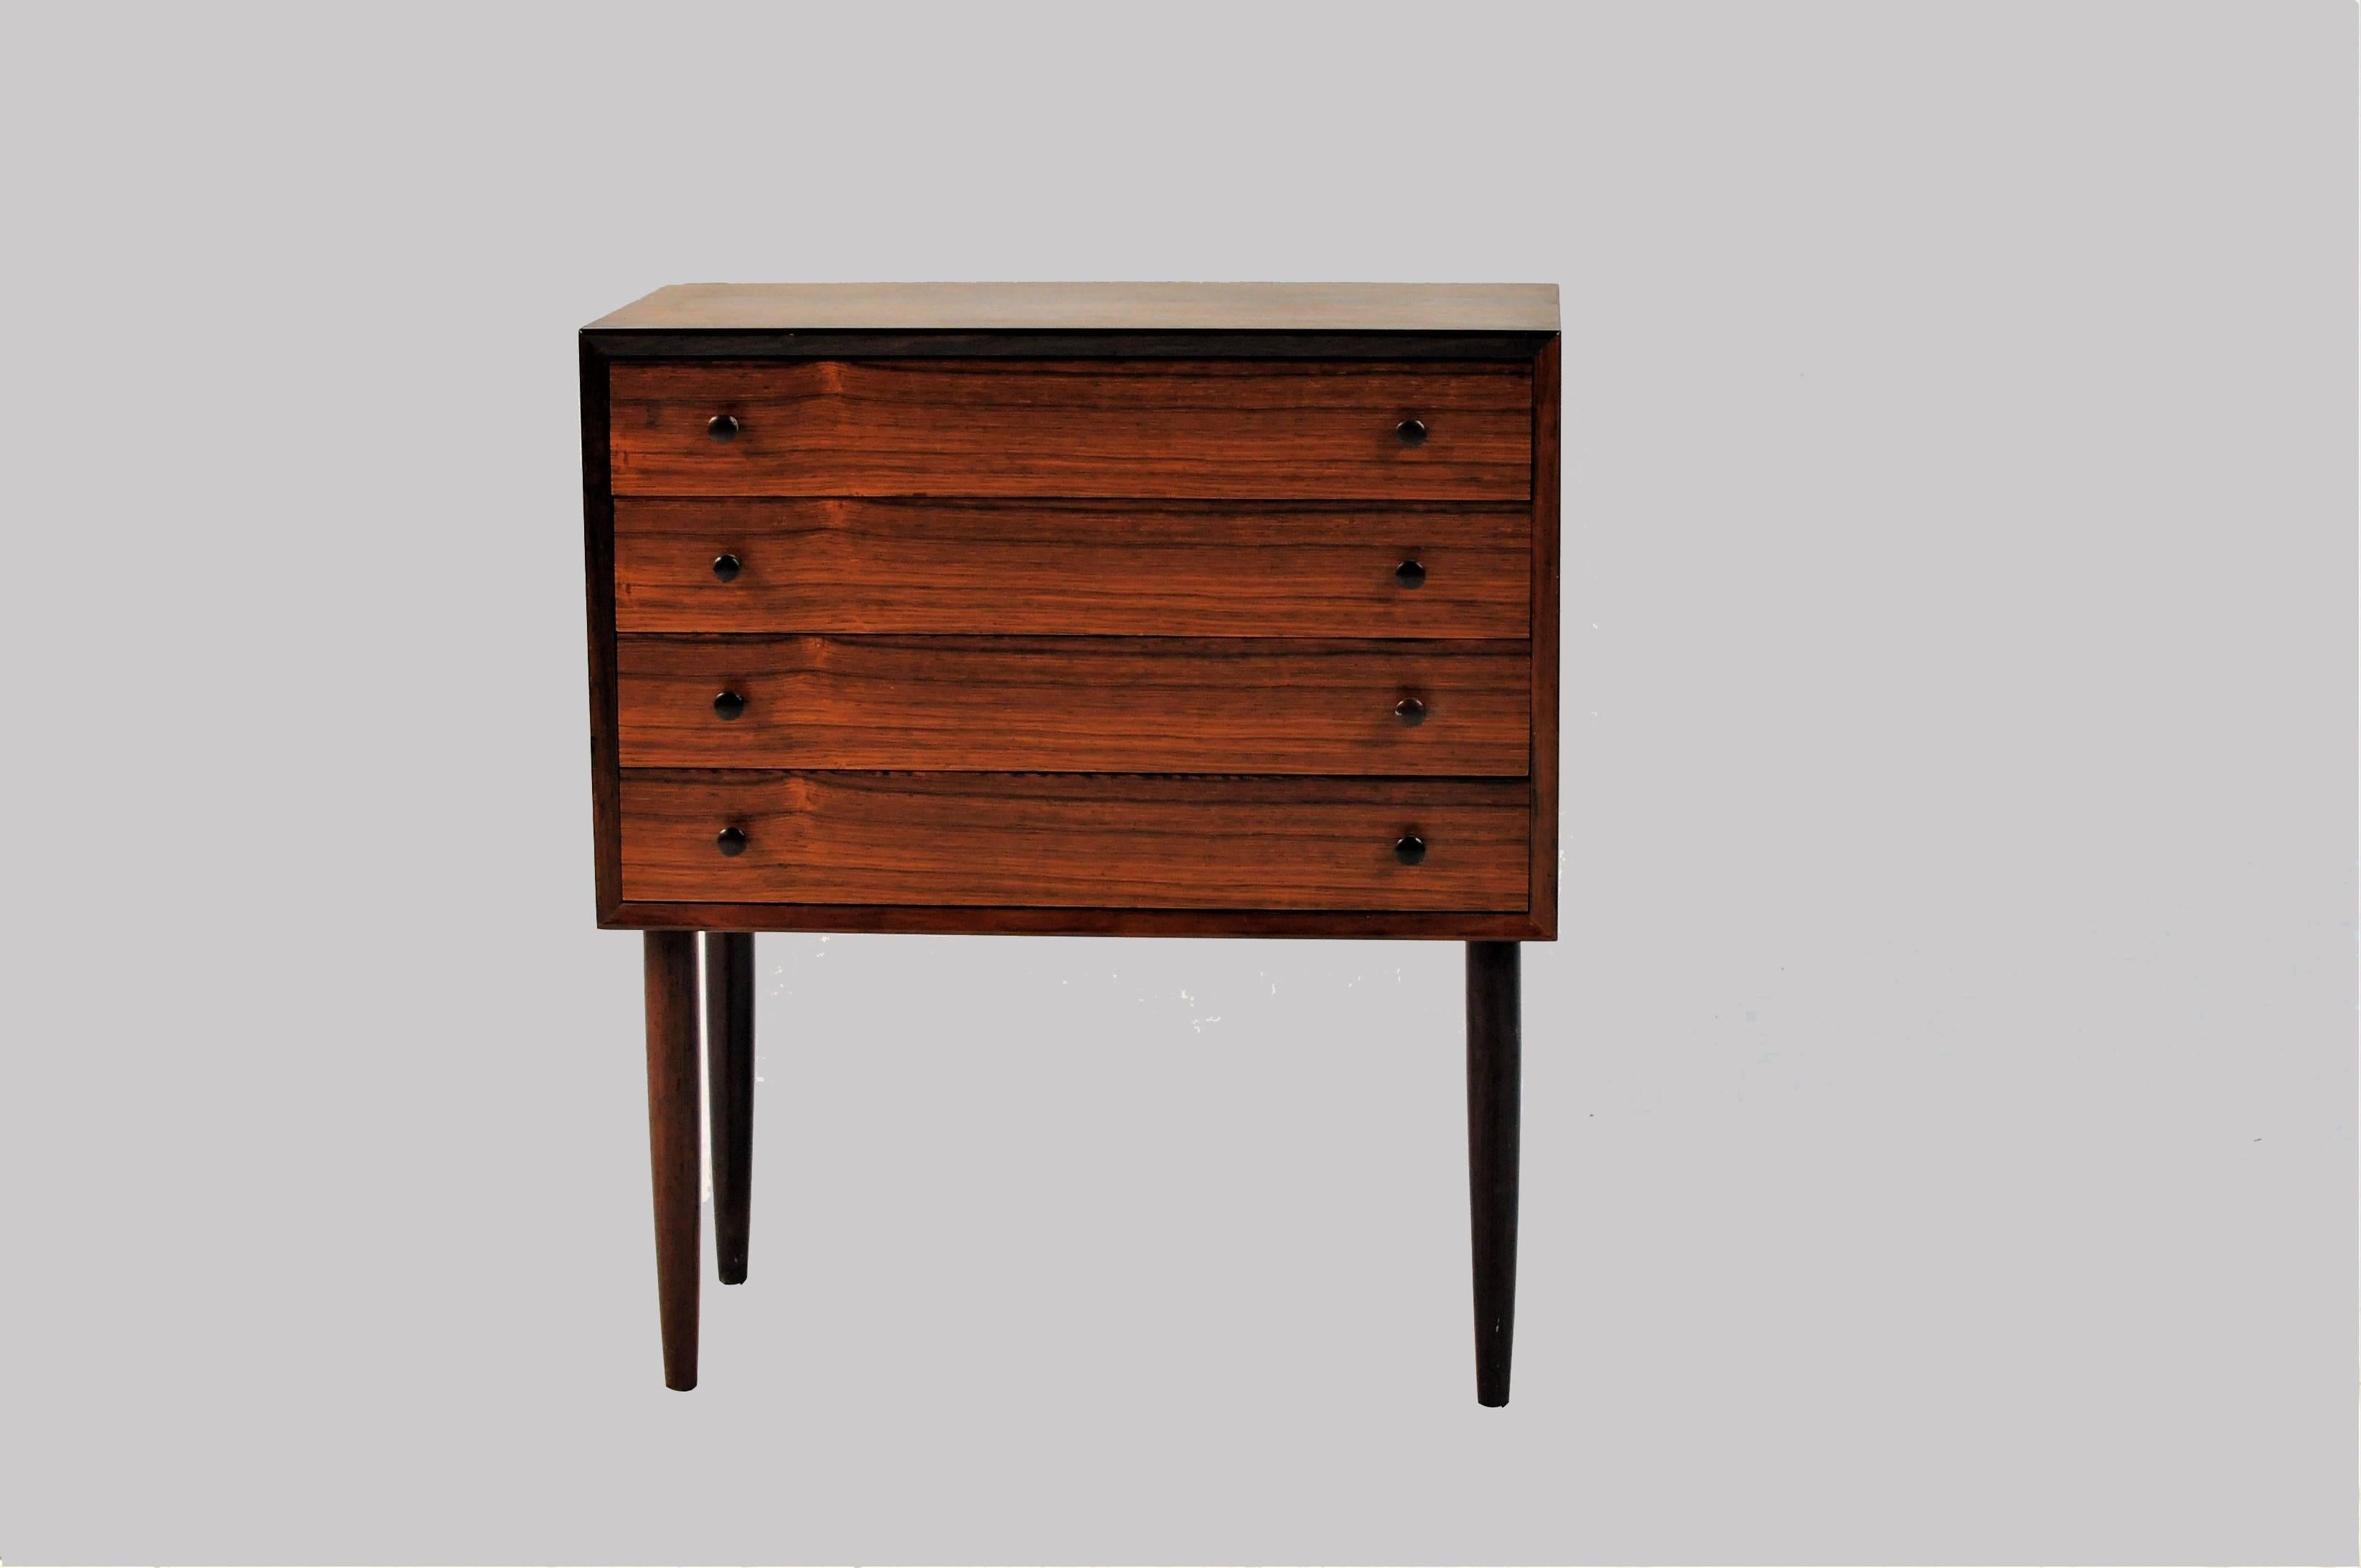 Danish chest of drawers in rosewood produced by Svend E. Jensens møbelfabrik in Aarhus, Denmark in the 1960s. The chest of drawers is restored and in good condition.

